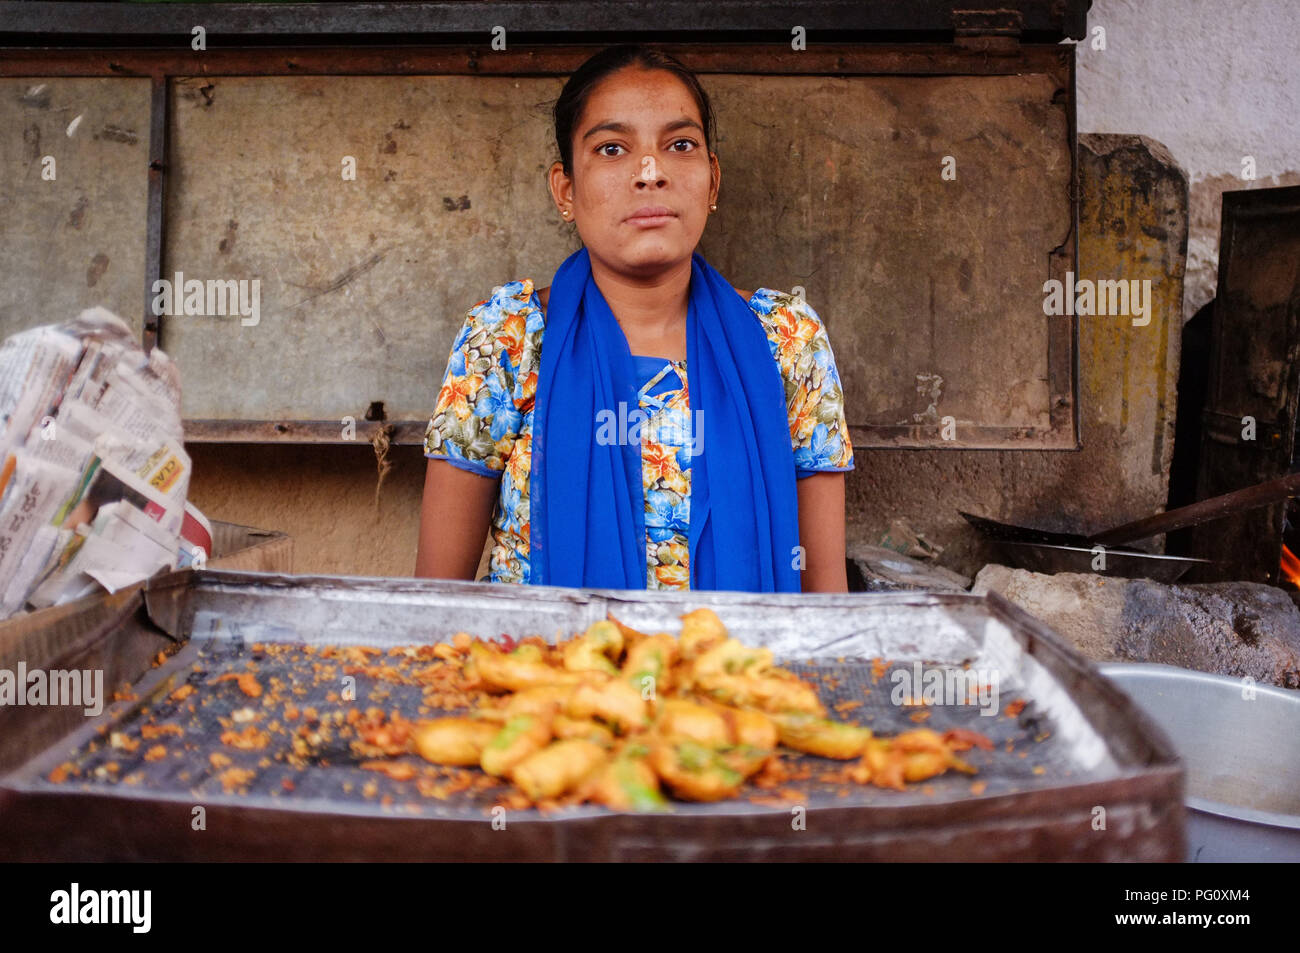 HAMPI, INDIA - JANUARY 27, 2015: Portrait of young Indian woman selling pakora on street stall in India. Stock Photo